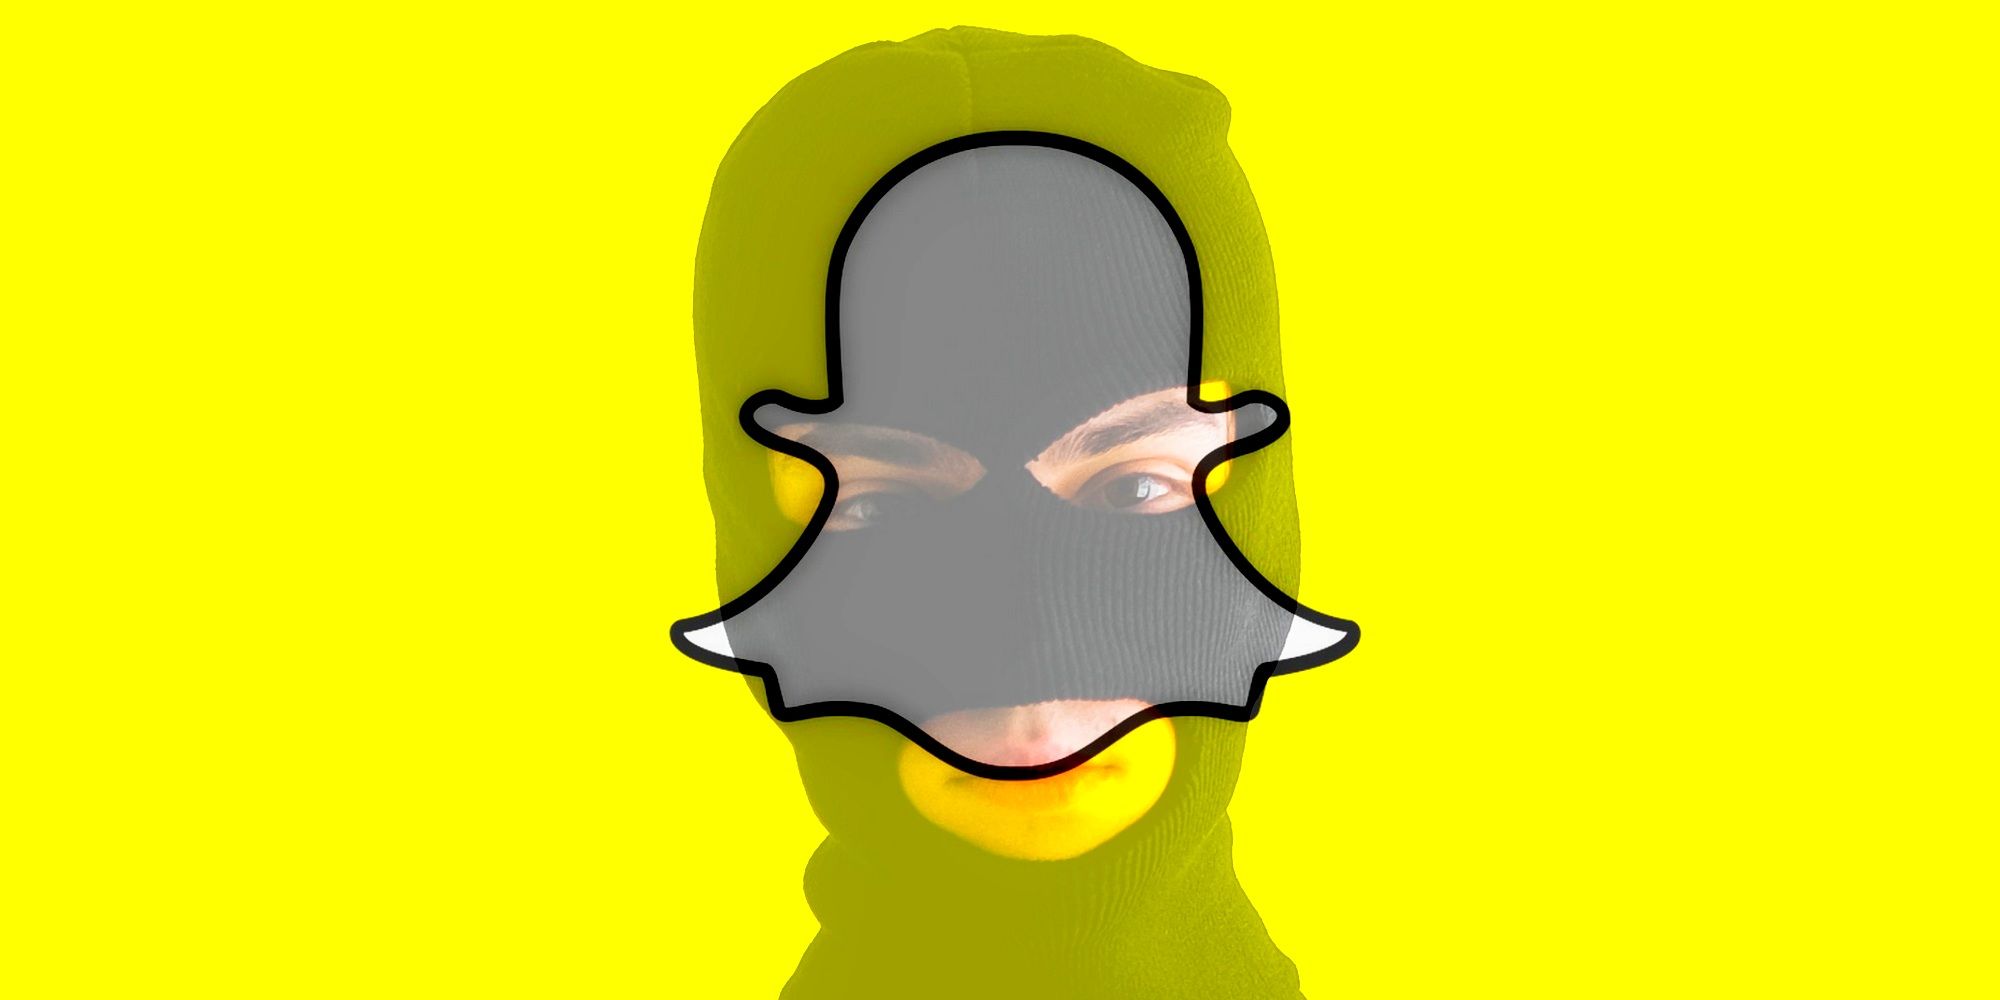 SmashAndGrab Thieves Use Snapchat & Other Apps To Coordinate Attacks